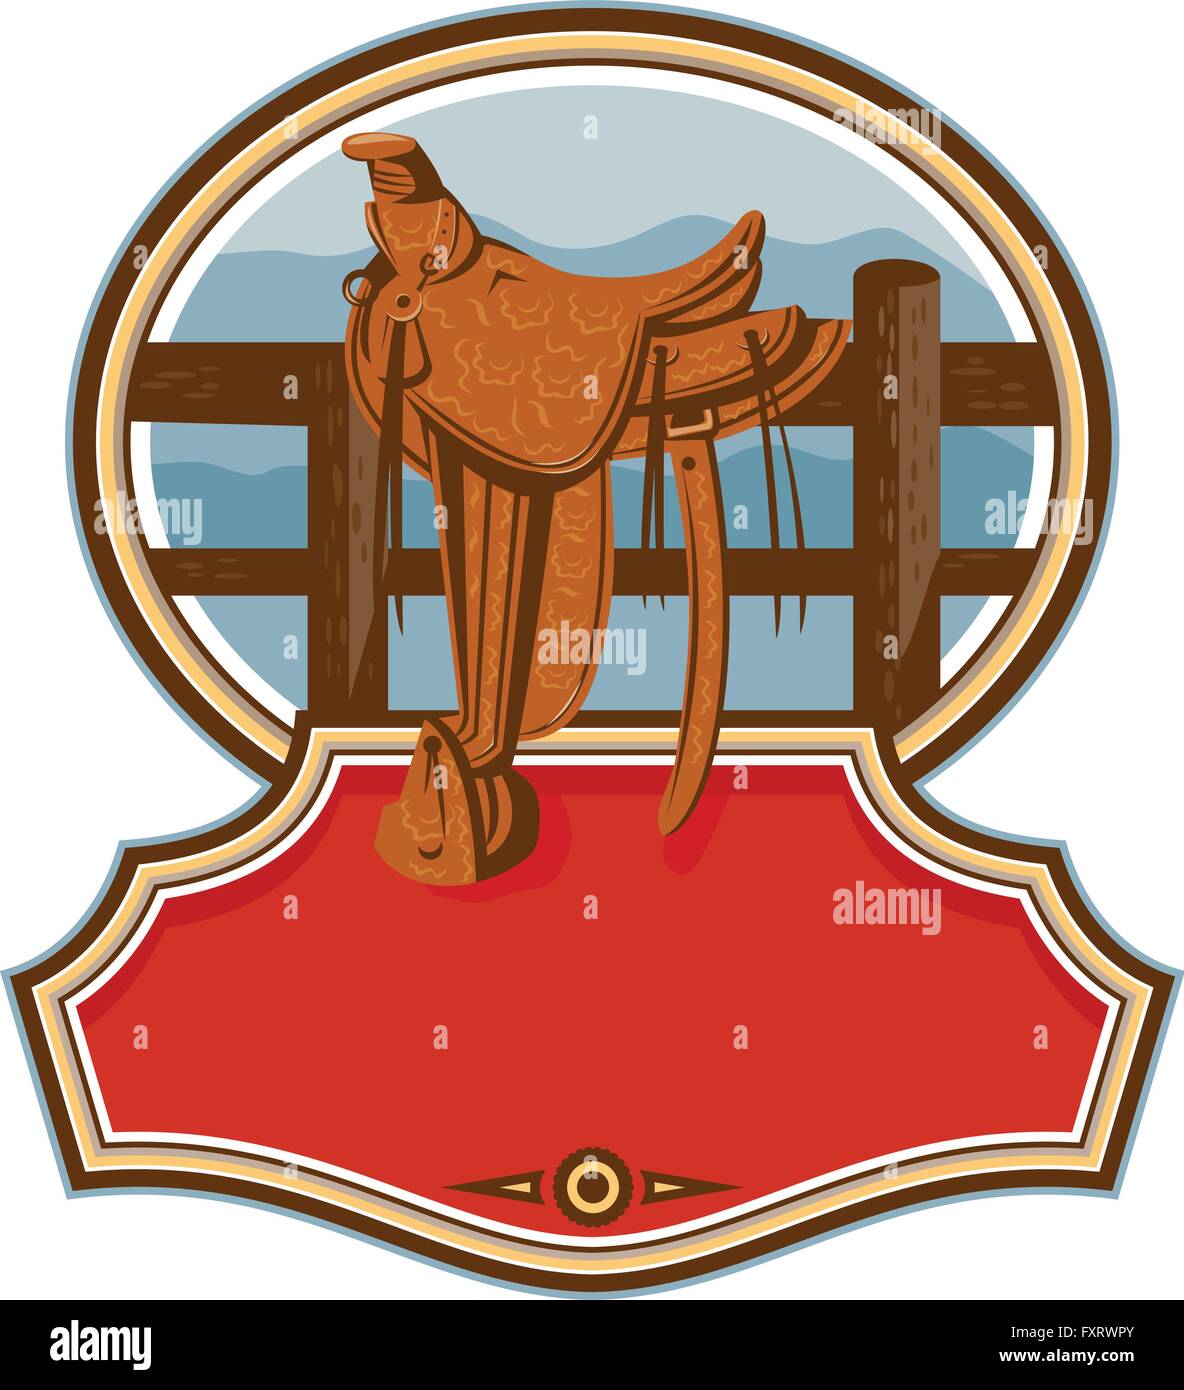 Illustration of an old style western saddle with decoration sitting on ranch fence set inside oval shape with banner in front done in retro style. Stock Vector